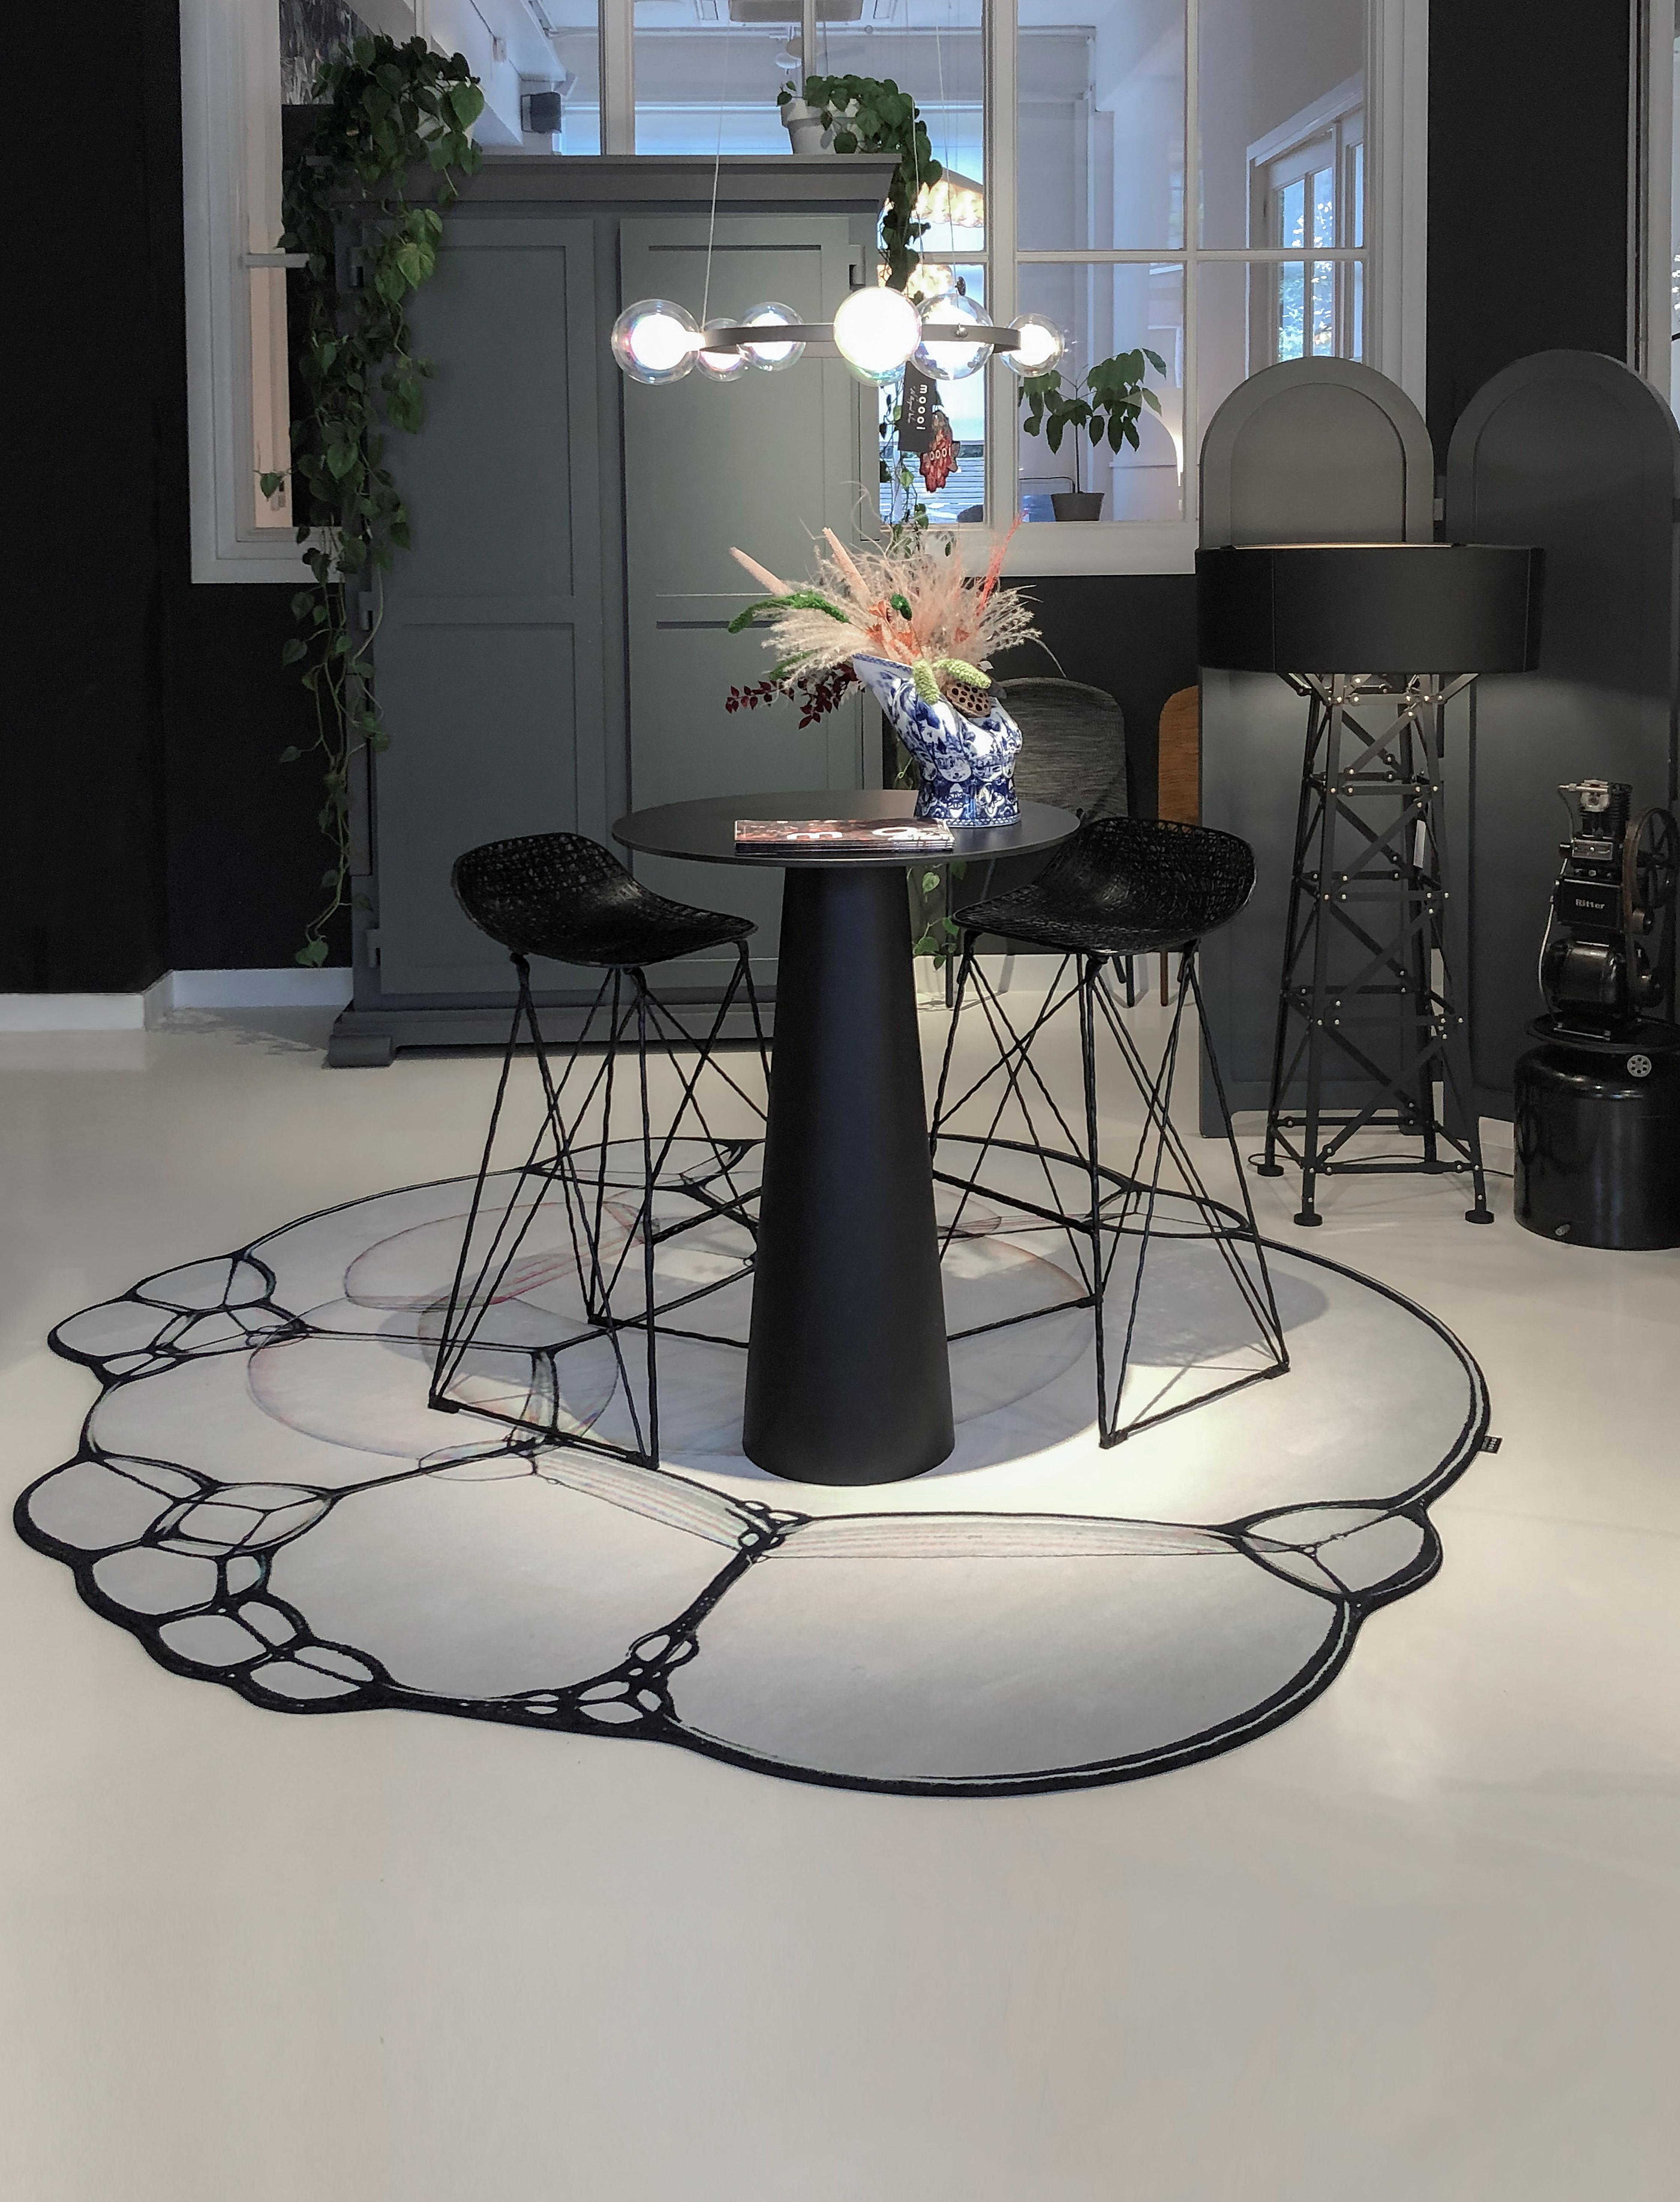 Moooi large bubble natural zoom rug in low pile polyamide by Sjoerd Vroonland

Sjoerd Vroonland is a master of revised crafts and a remarkable furniture designer. Best known for his “extension chair” that became an instant icon of the Dutch Design